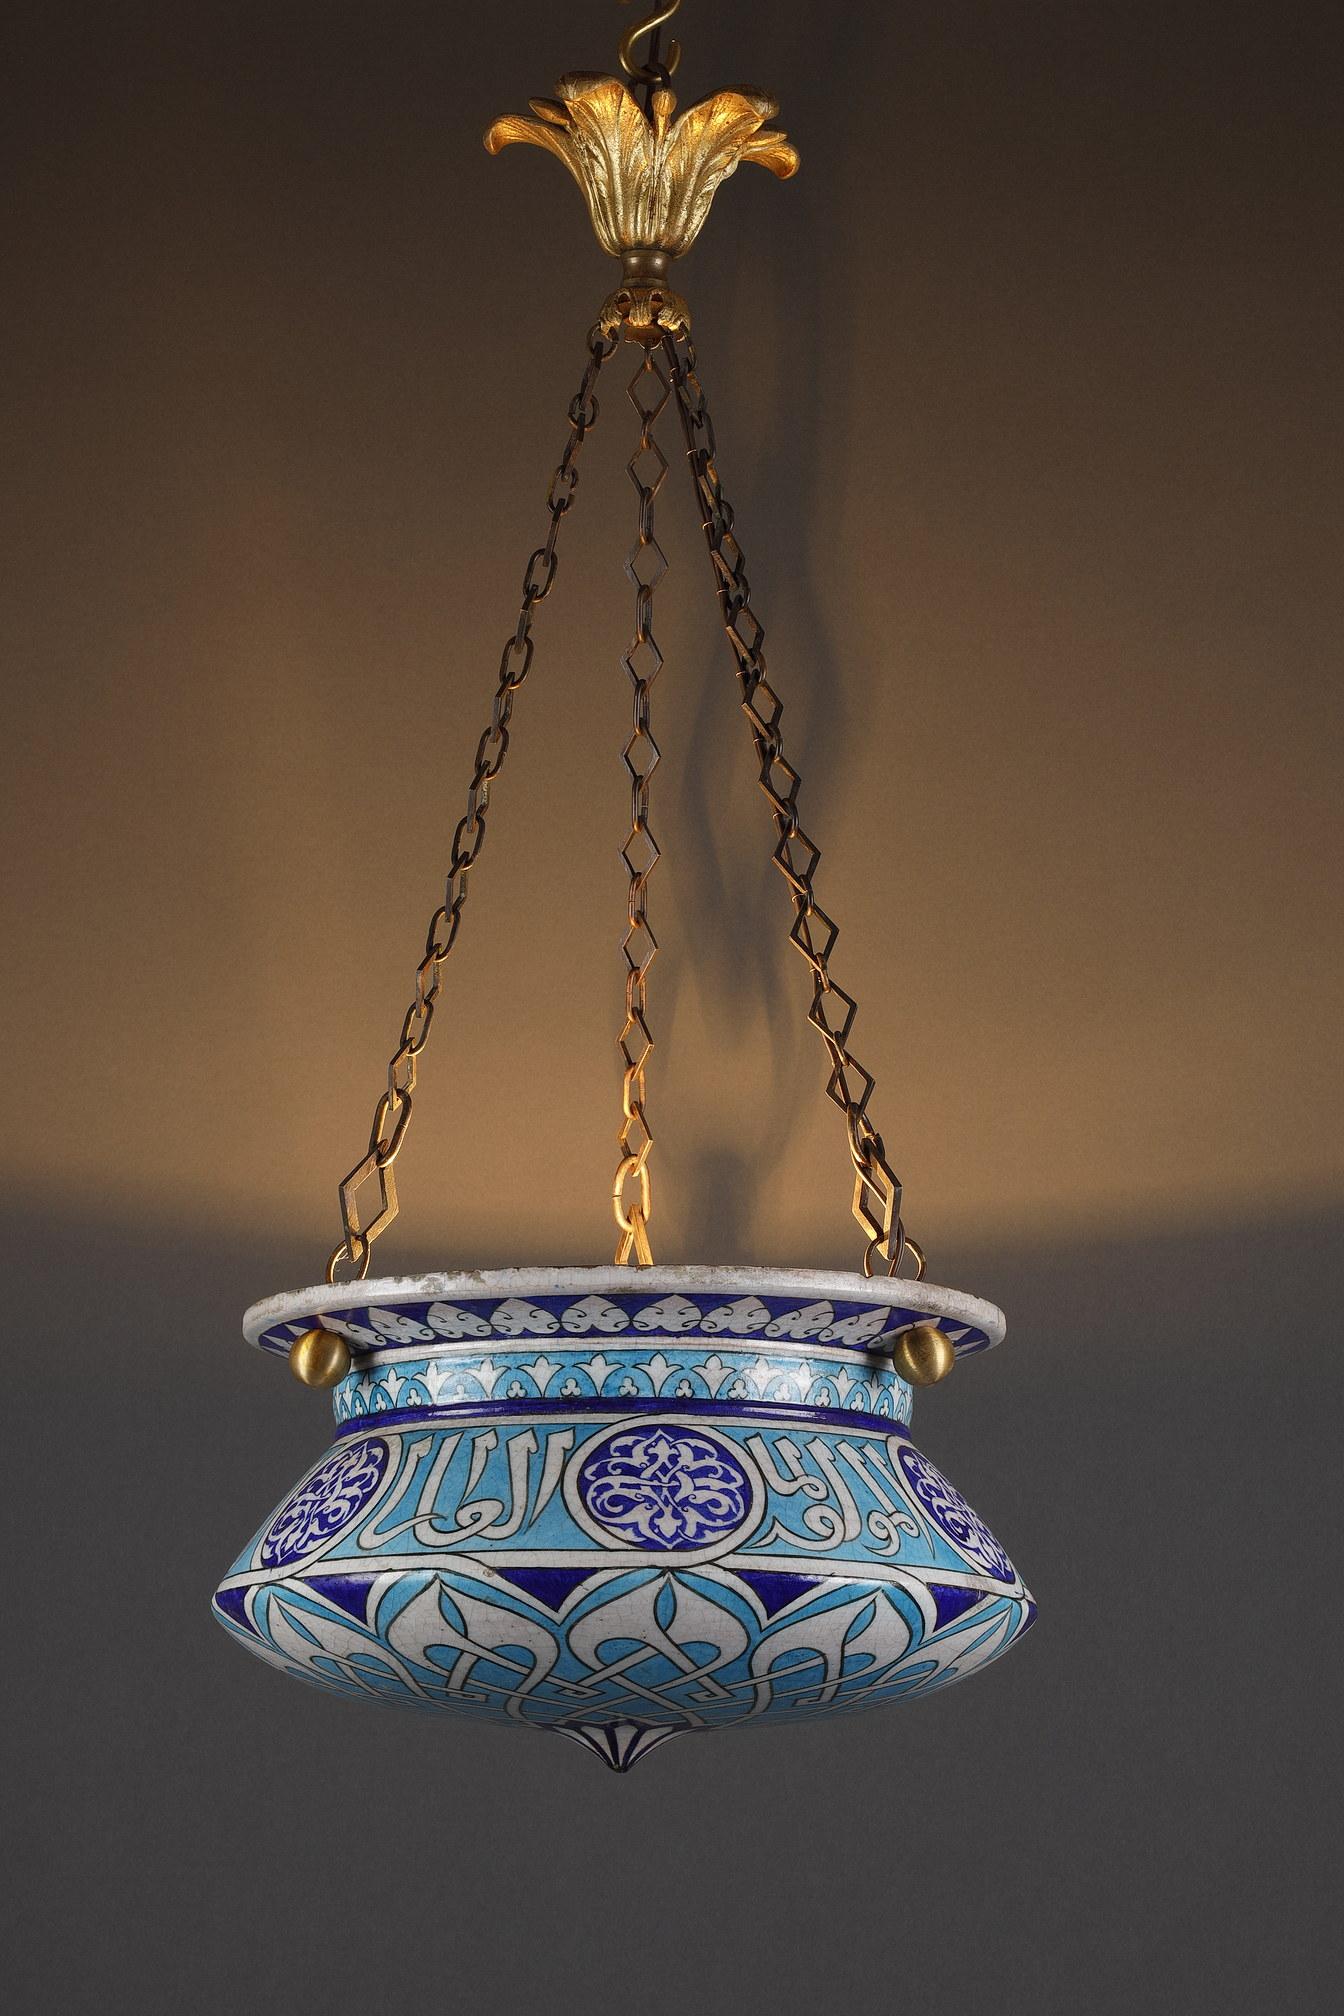 Enameled ceramic chandelier with flared border underlined by a frieze of stylized foliage, decorated on the body with Arabic characters on a light blue background, alternating with tracery cartouches on a dark blue background, and white and blue